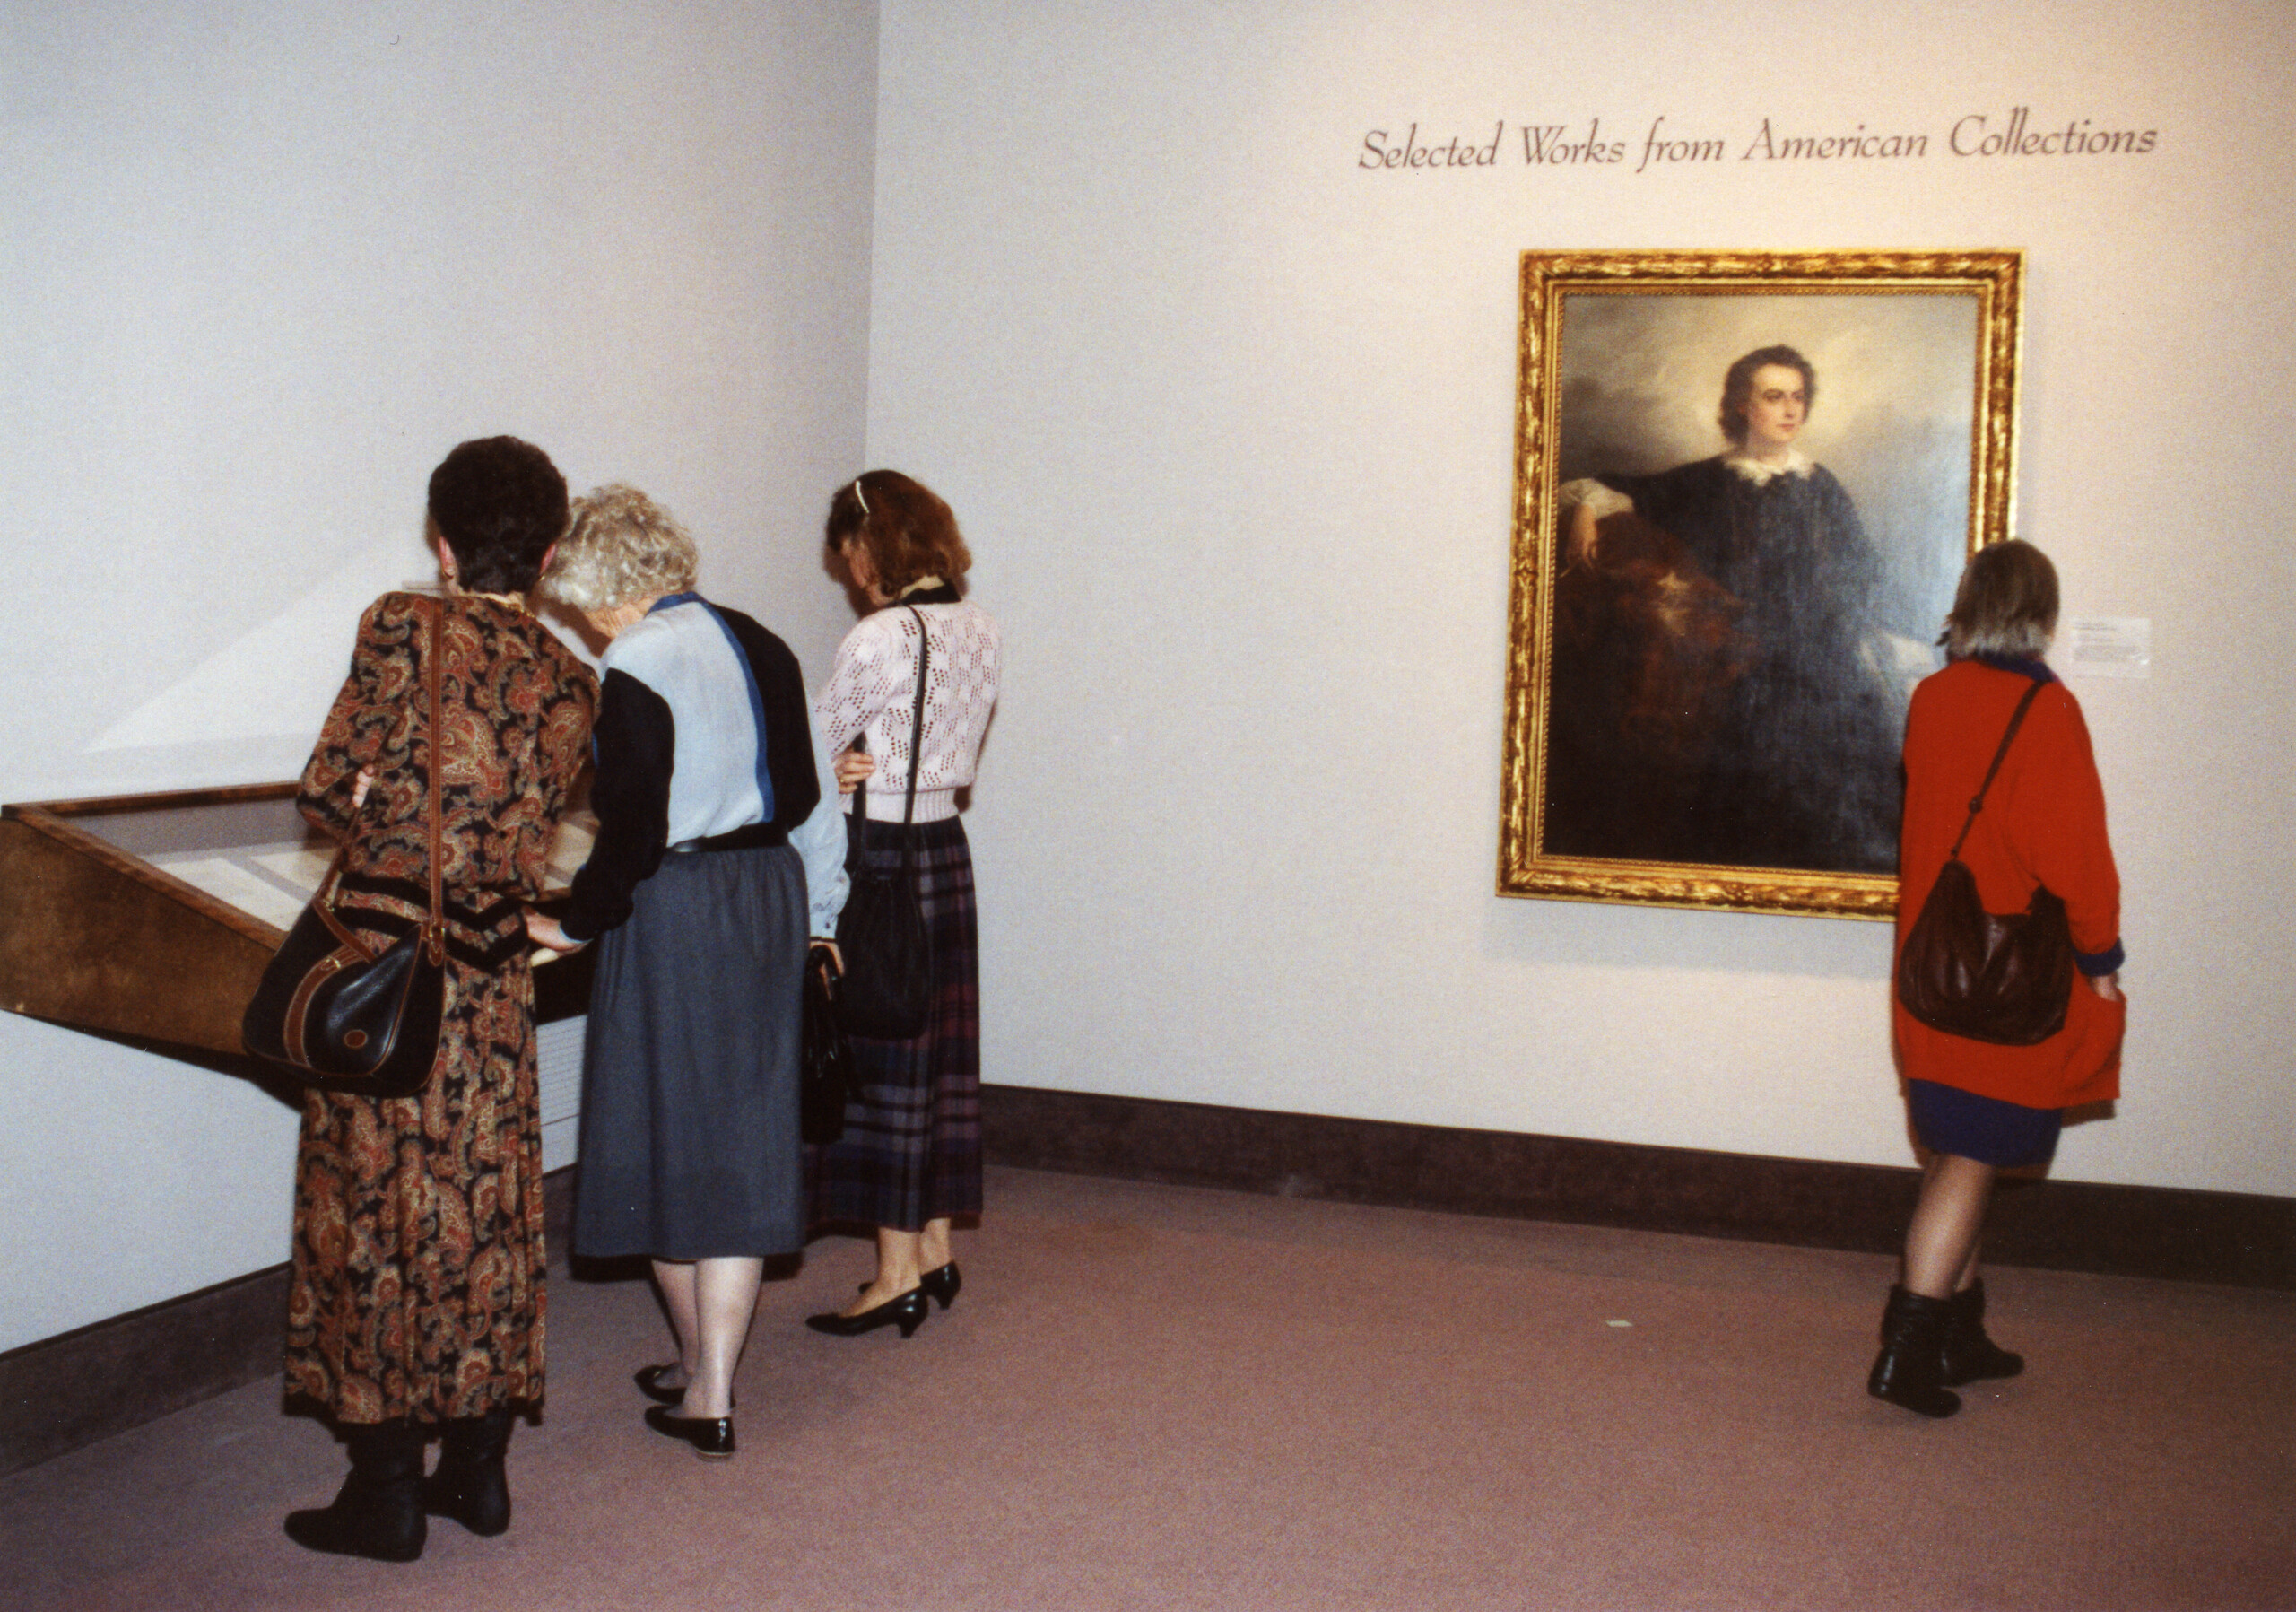 View of a gallery space. Several people are in the museum. On one wall, a portrait is hanging underneath the text 